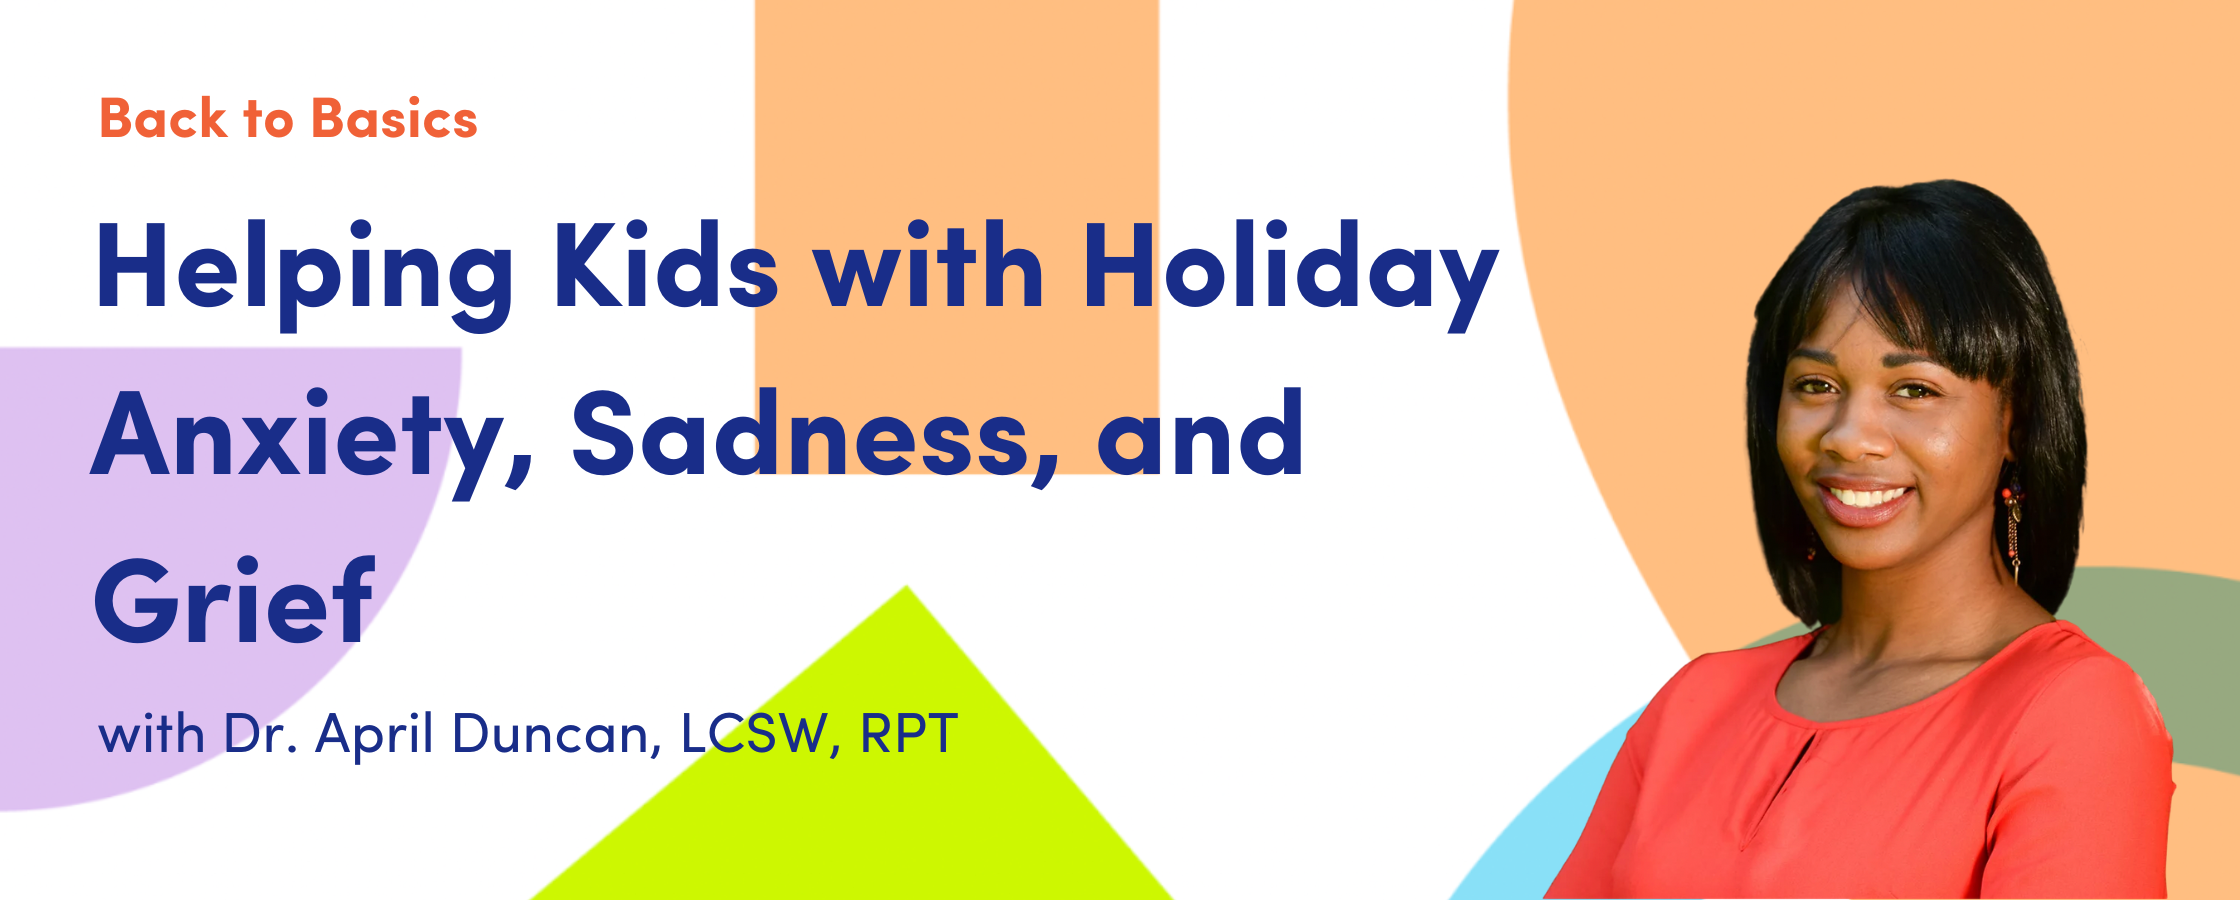 Helping Kids with Holiday Anxiety, Sadness, and Grief